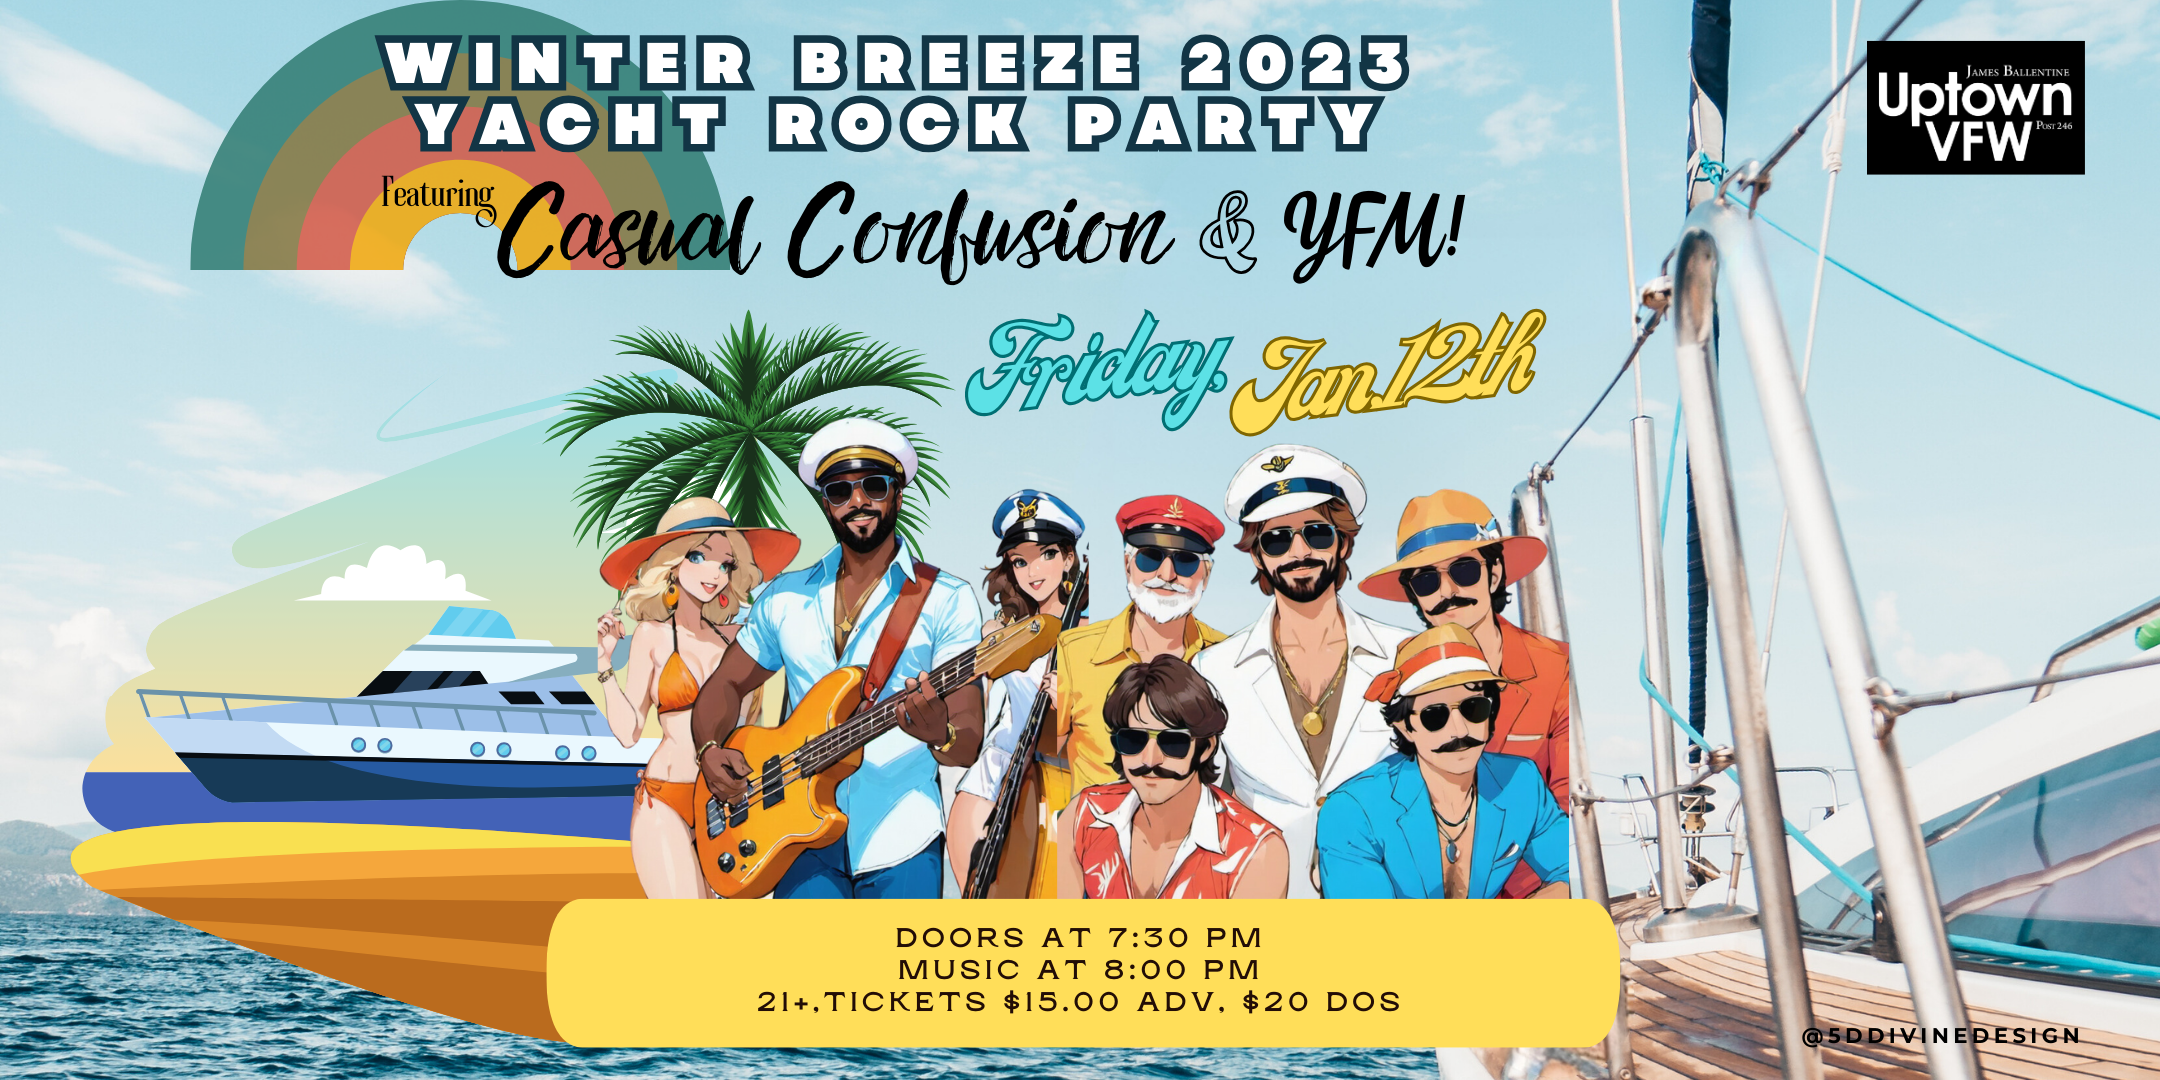 Winter Breeze Yacht Rock Party Casual Confusion YFM Saturday, January 12 James Ballentine "Uptown" VFW Post 246 Doors 7:30pm :: Music 8:00pm :: 21+ GA $15 ADV / $20 DOS